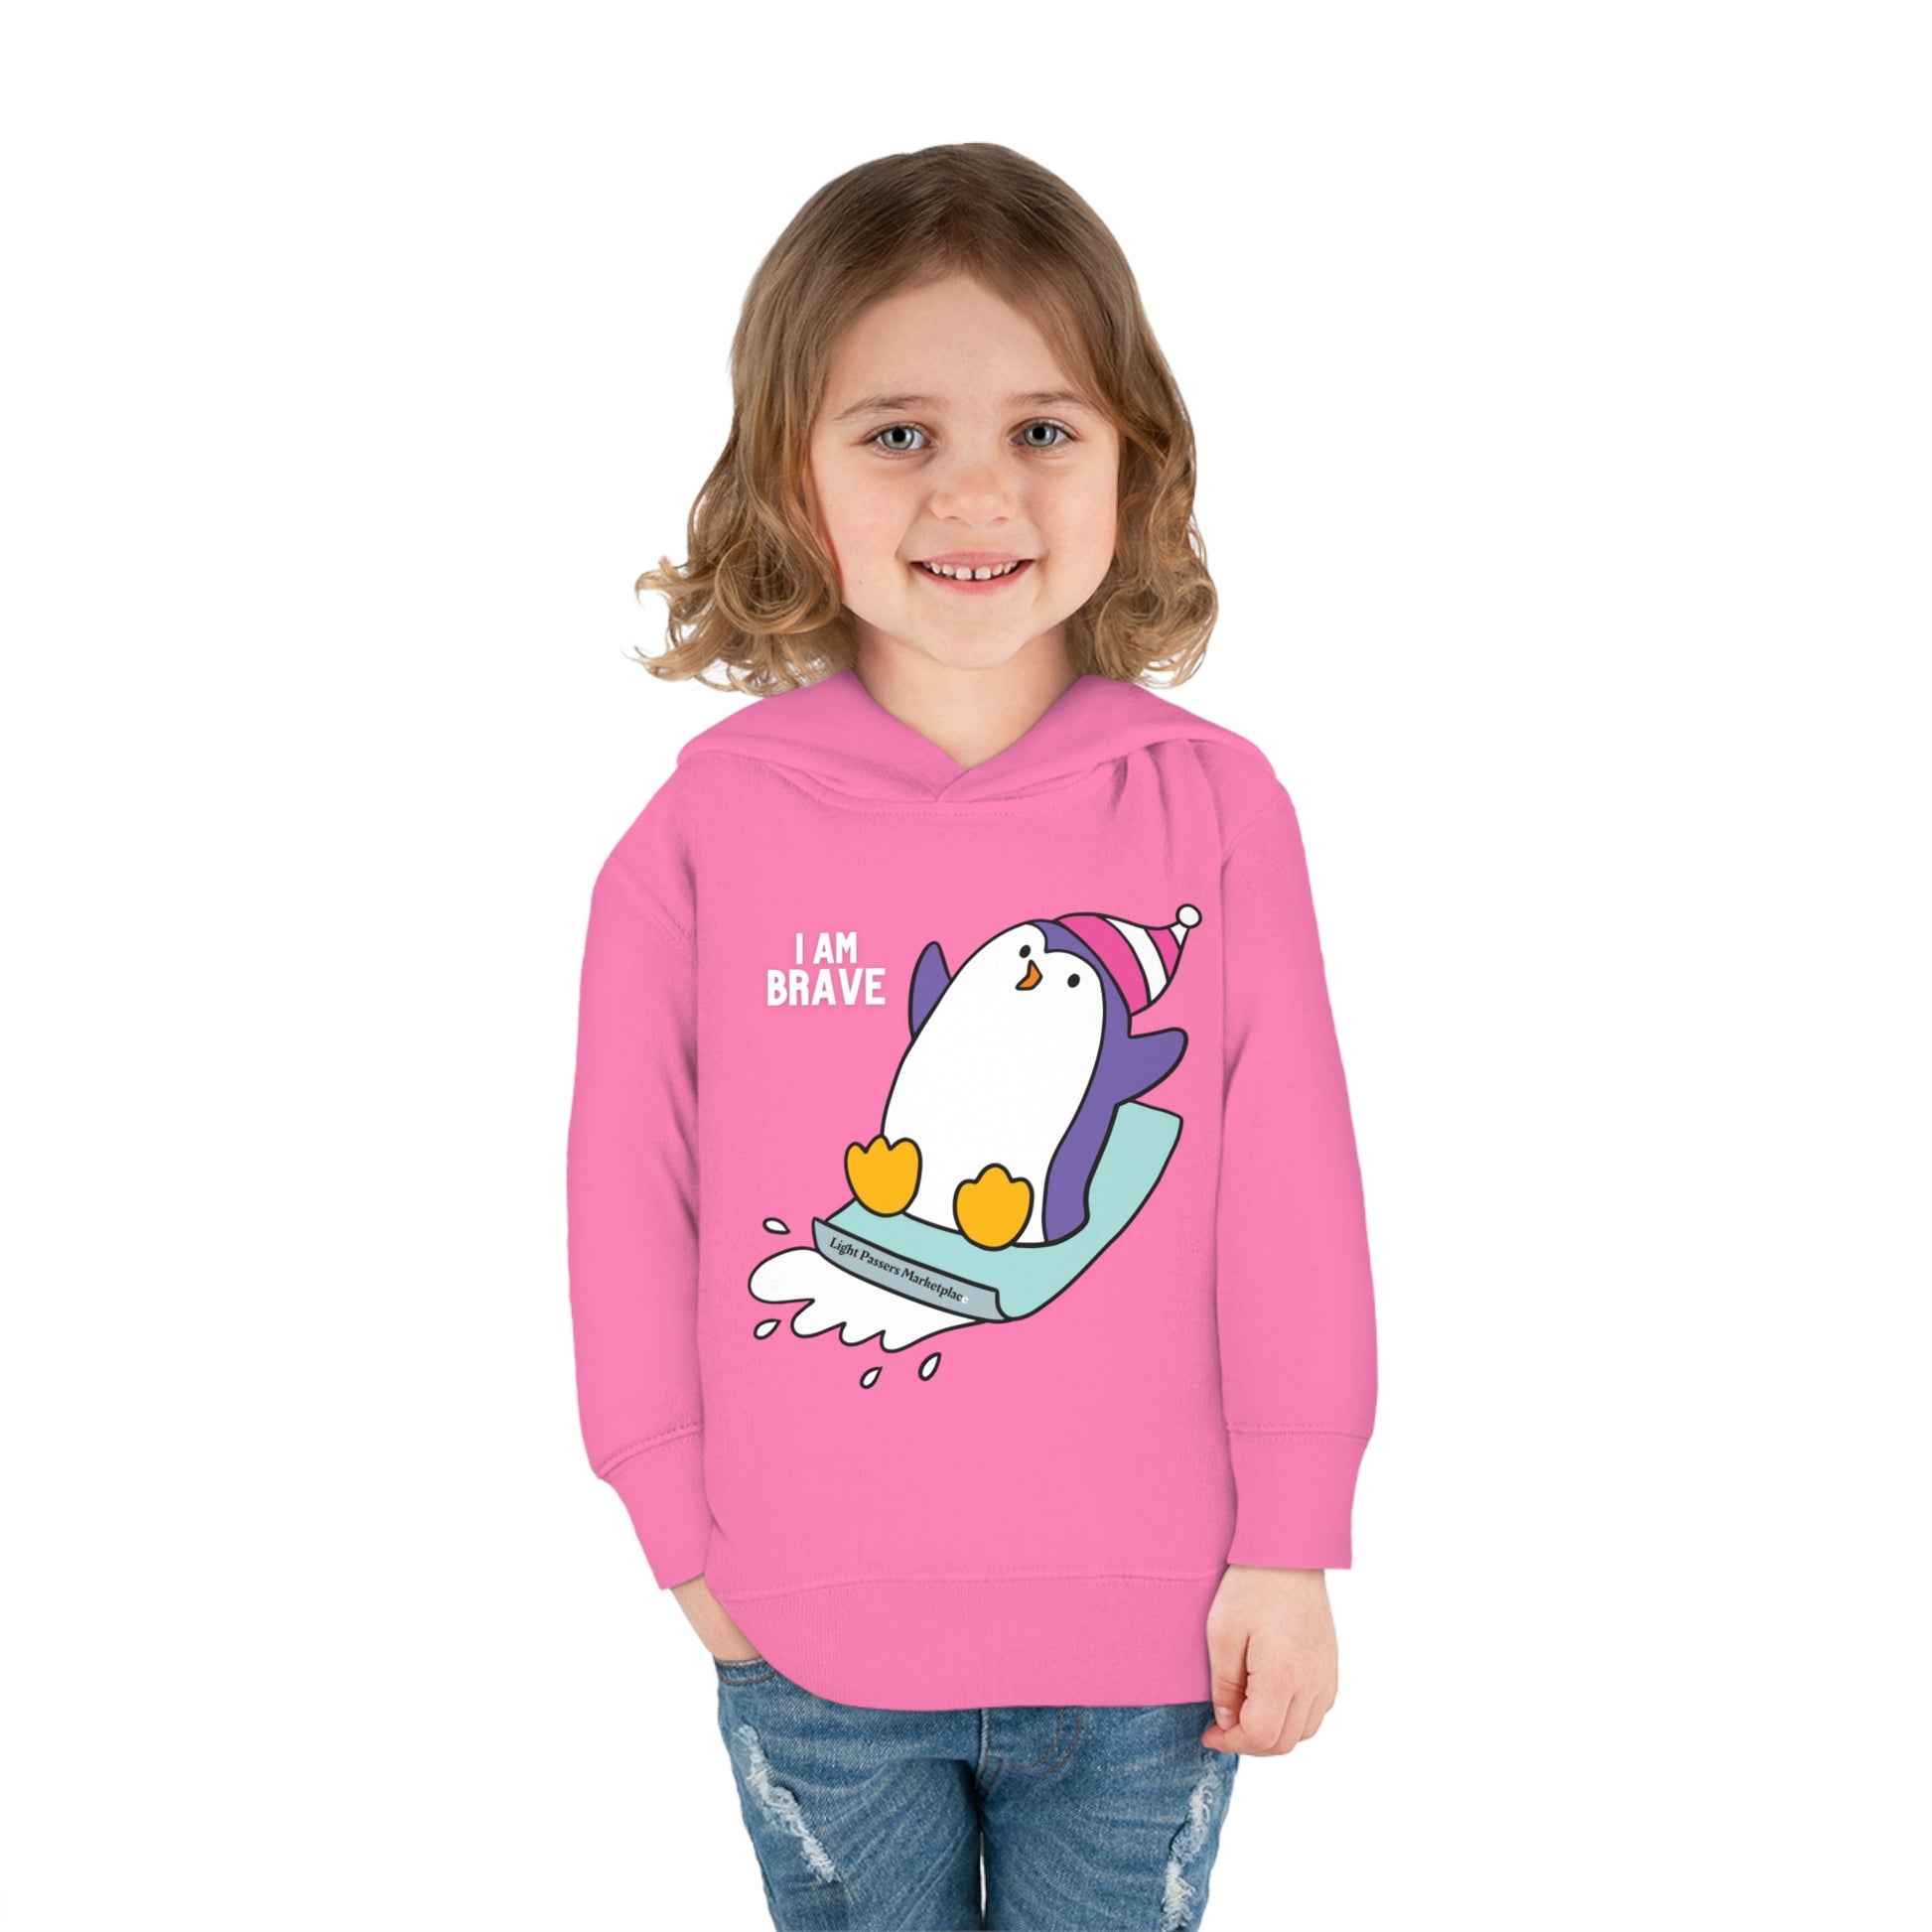 A smiling girl in a Rabbit Skins Brave Penguin Toddler Hooded Sweatshirt with jersey-lined hood, cover-stitched details, and side seam pockets for cozy durability.